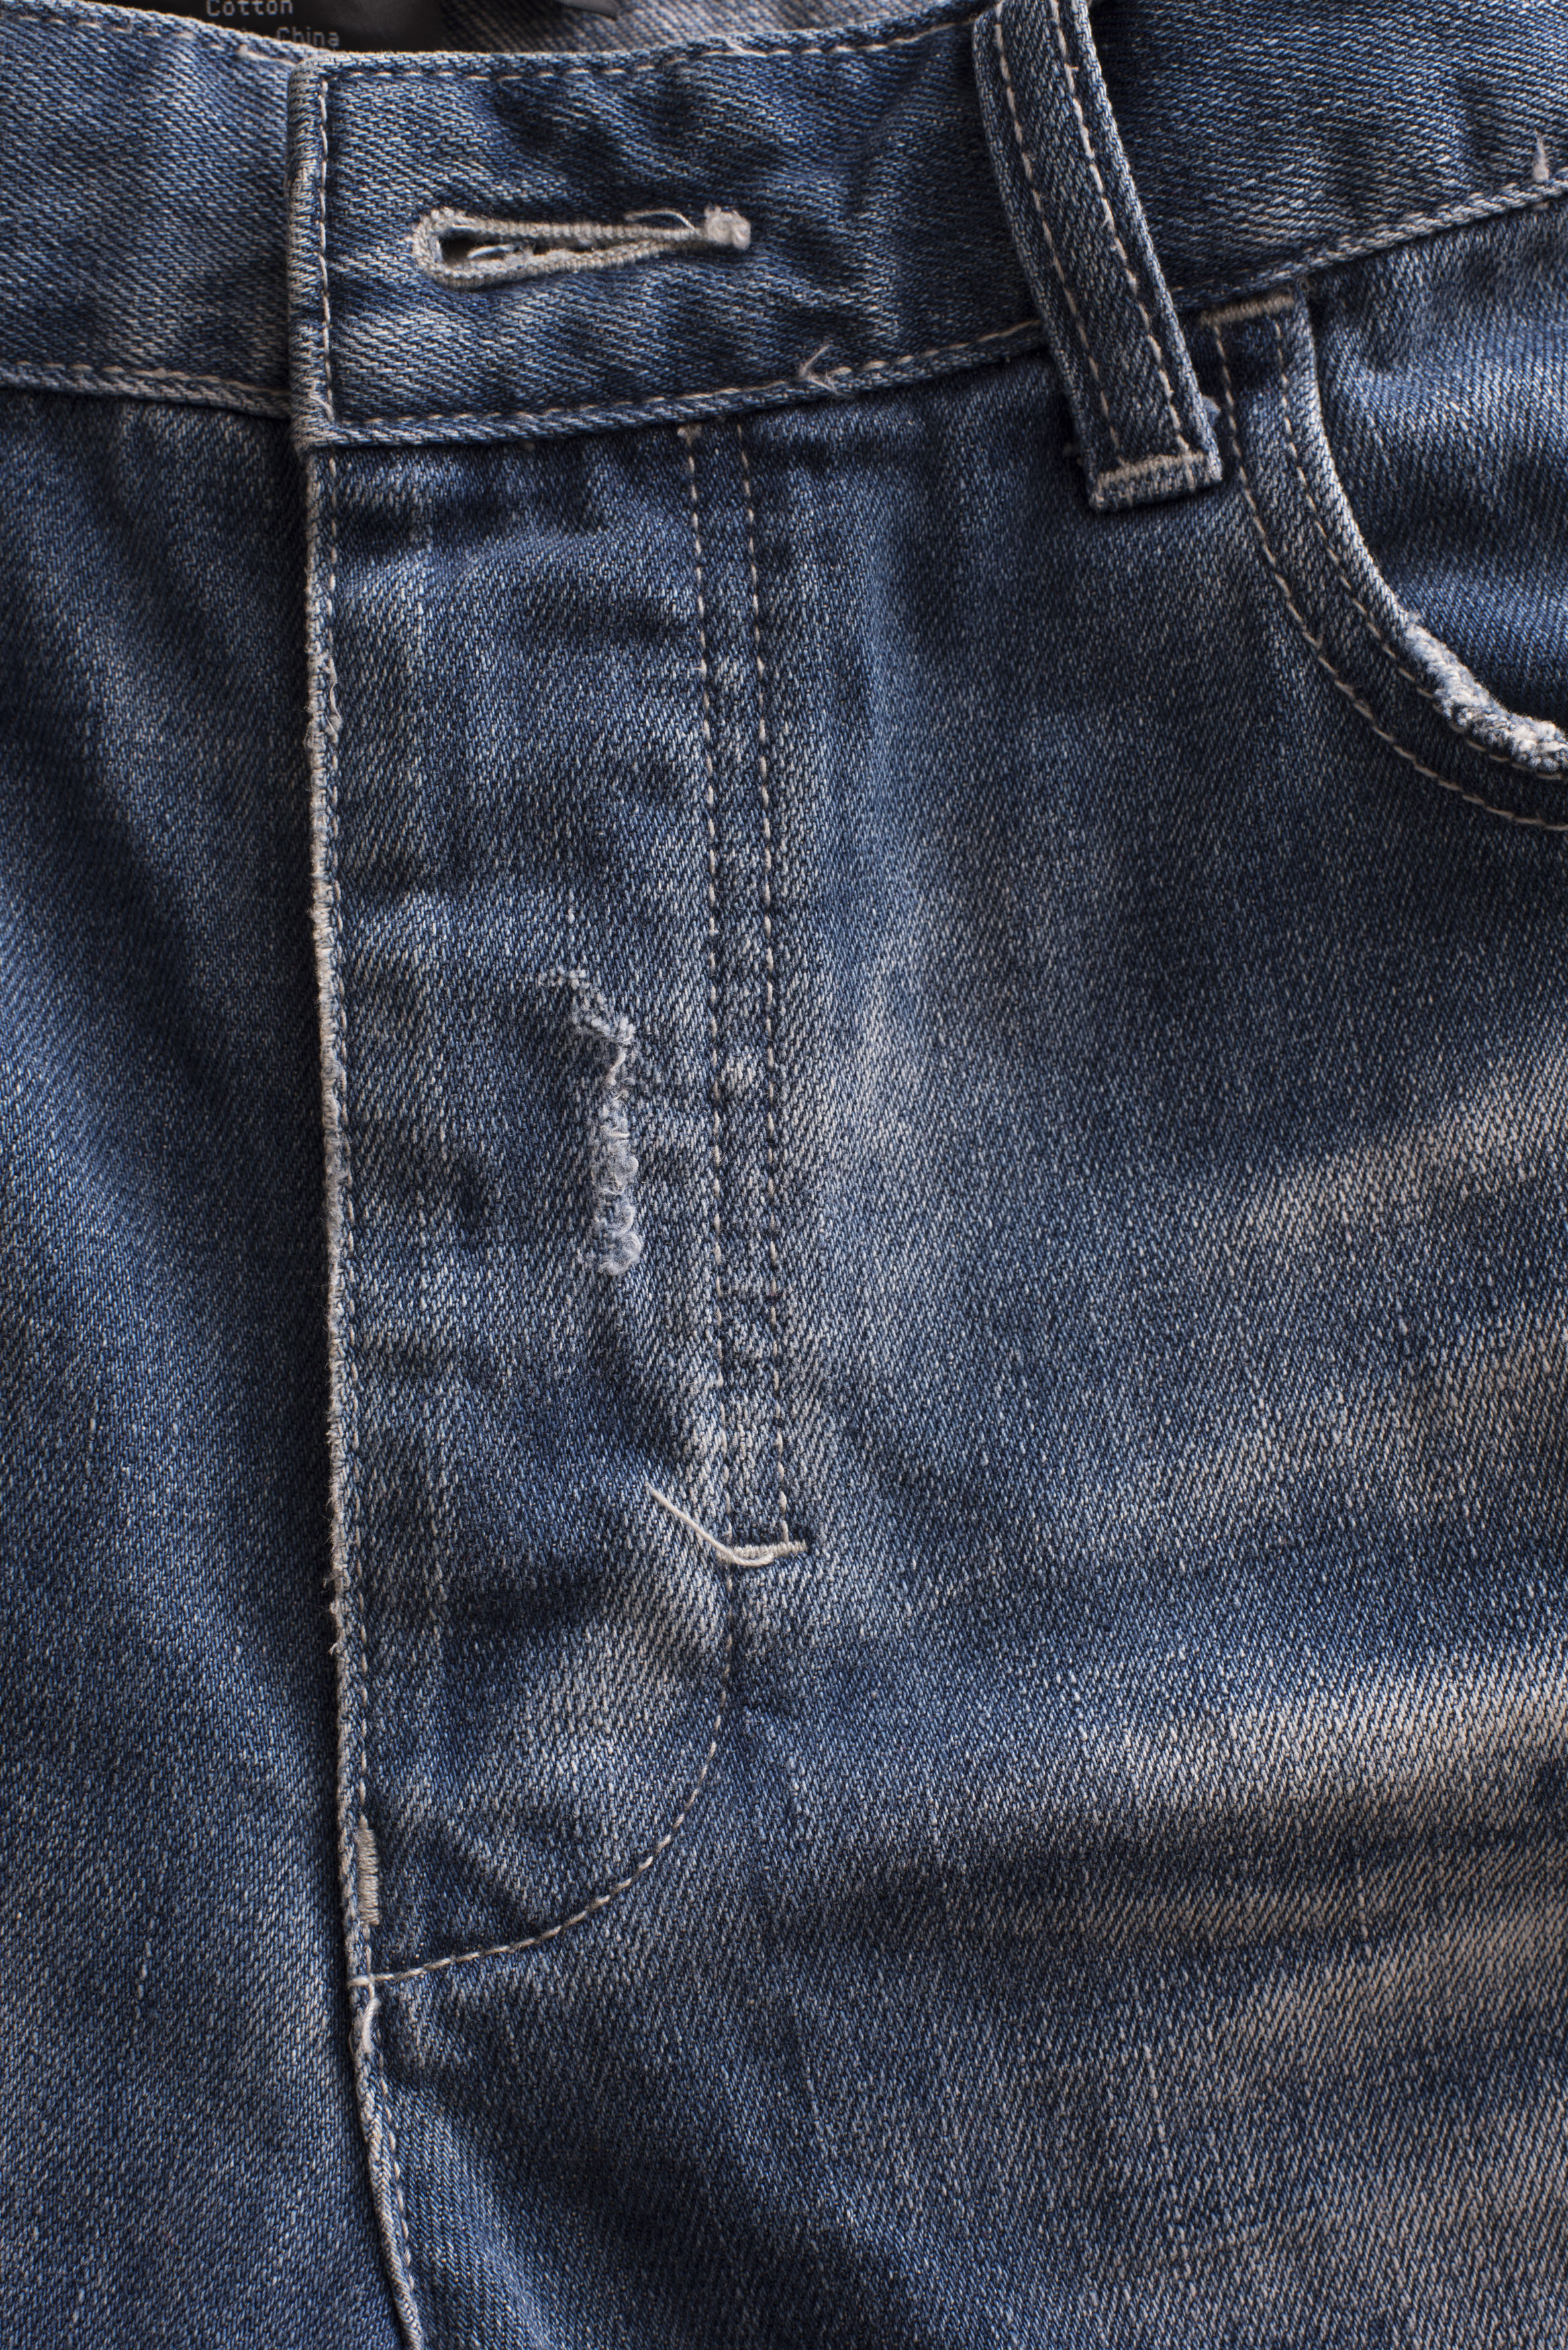 old worn jeans-9673 | Stockarch Free Stock Photo Archive